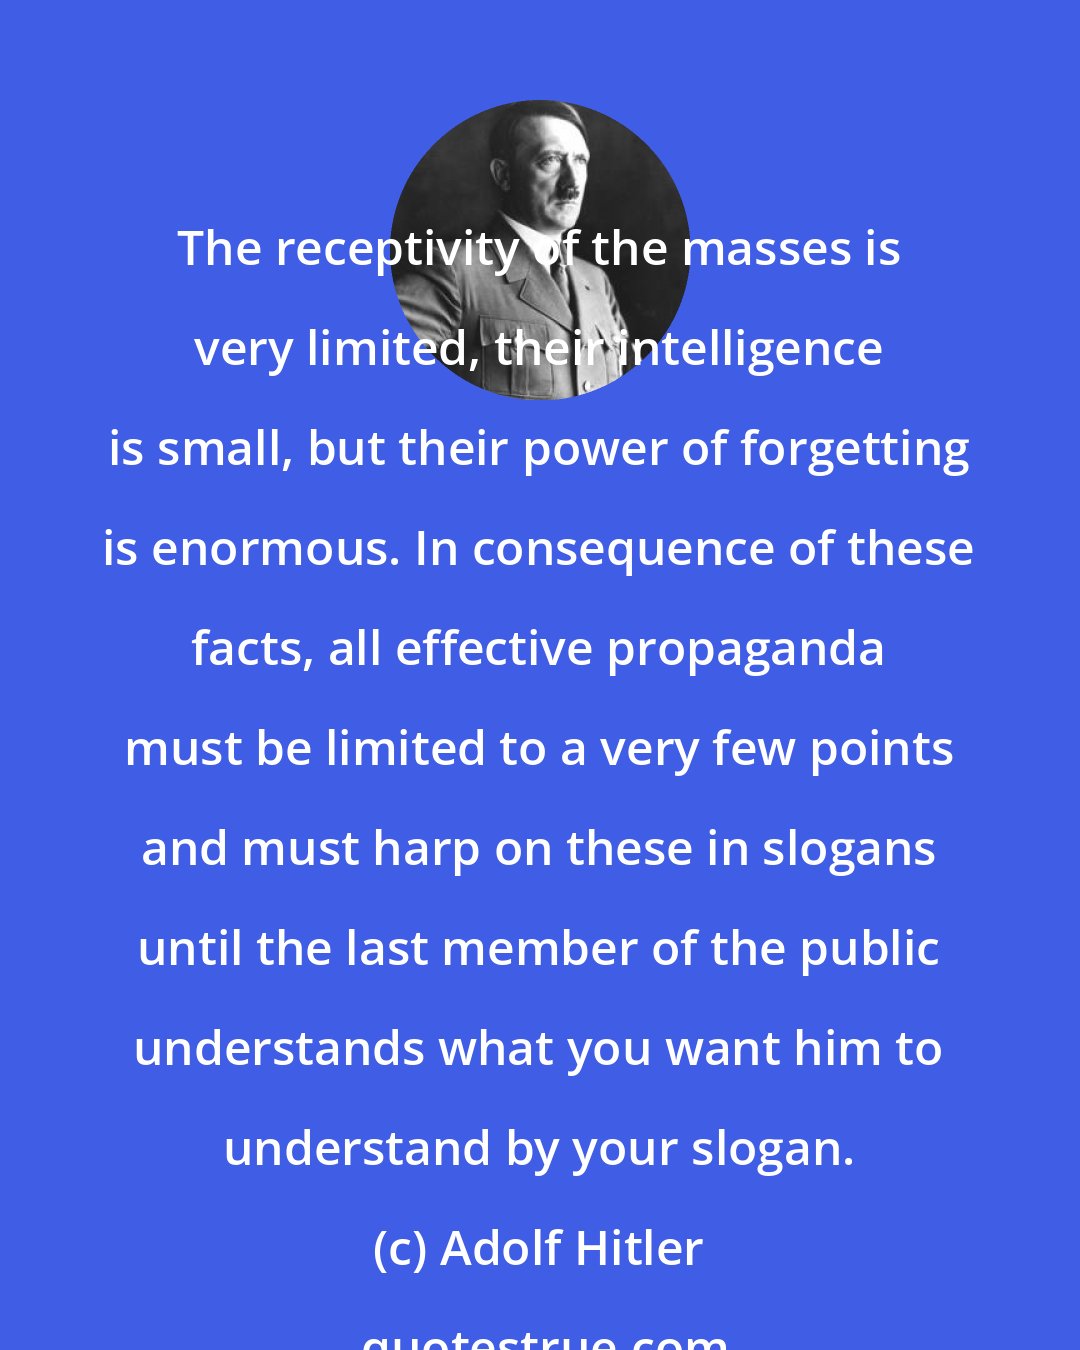 Adolf Hitler: The receptivity of the masses is very limited, their intelligence is small, but their power of forgetting is enormous. In consequence of these facts, all effective propaganda must be limited to a very few points and must harp on these in slogans until the last member of the public understands what you want him to understand by your slogan.